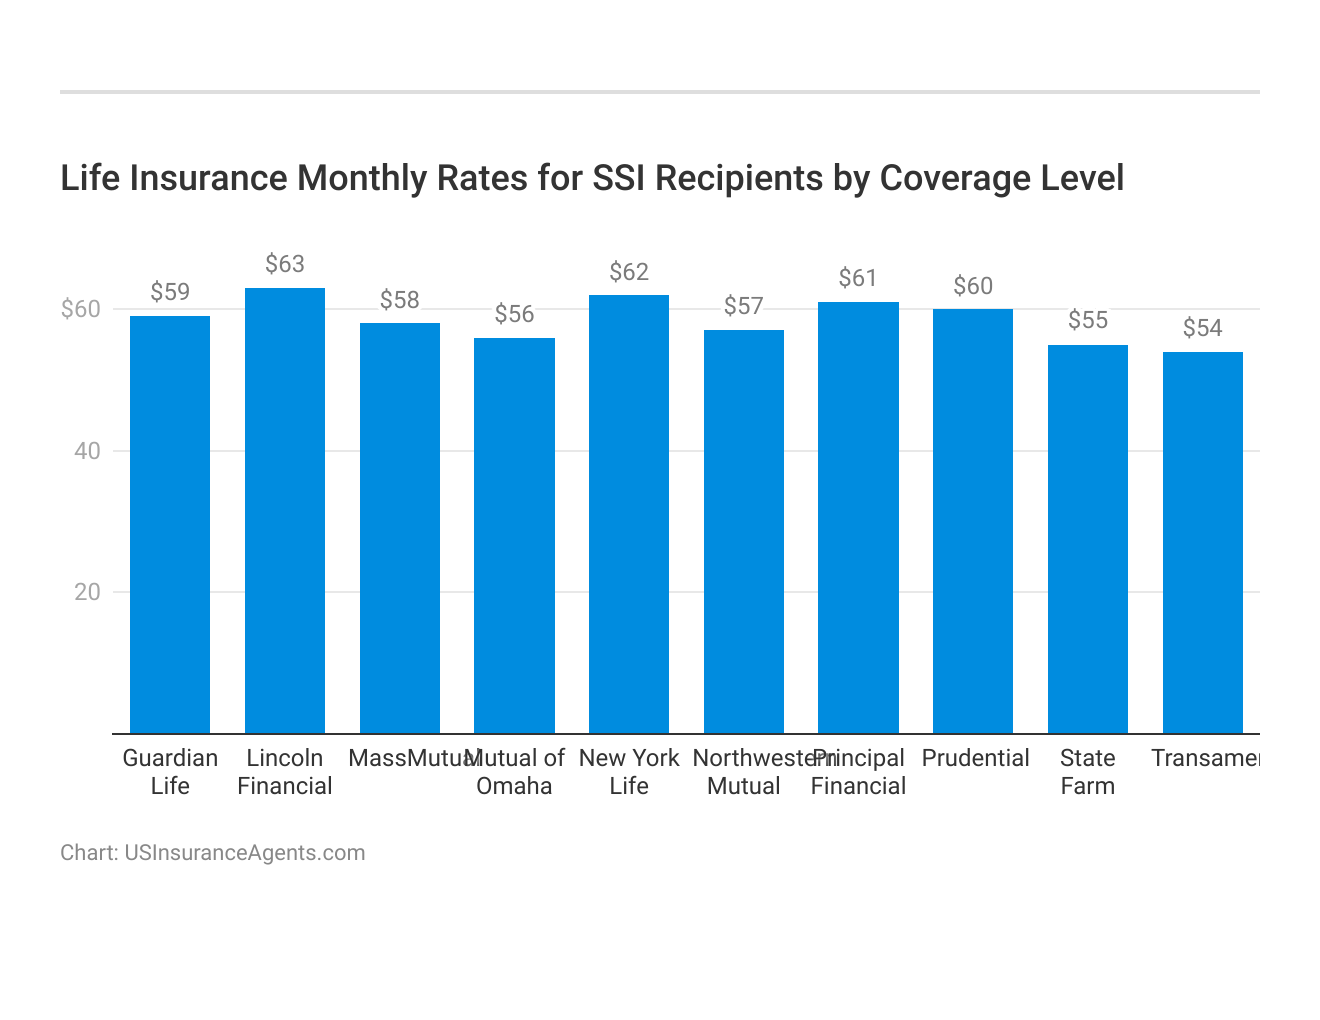 <h3>Life Insurance Monthly Rates for SSI Recipients by Coverage Level</h3>